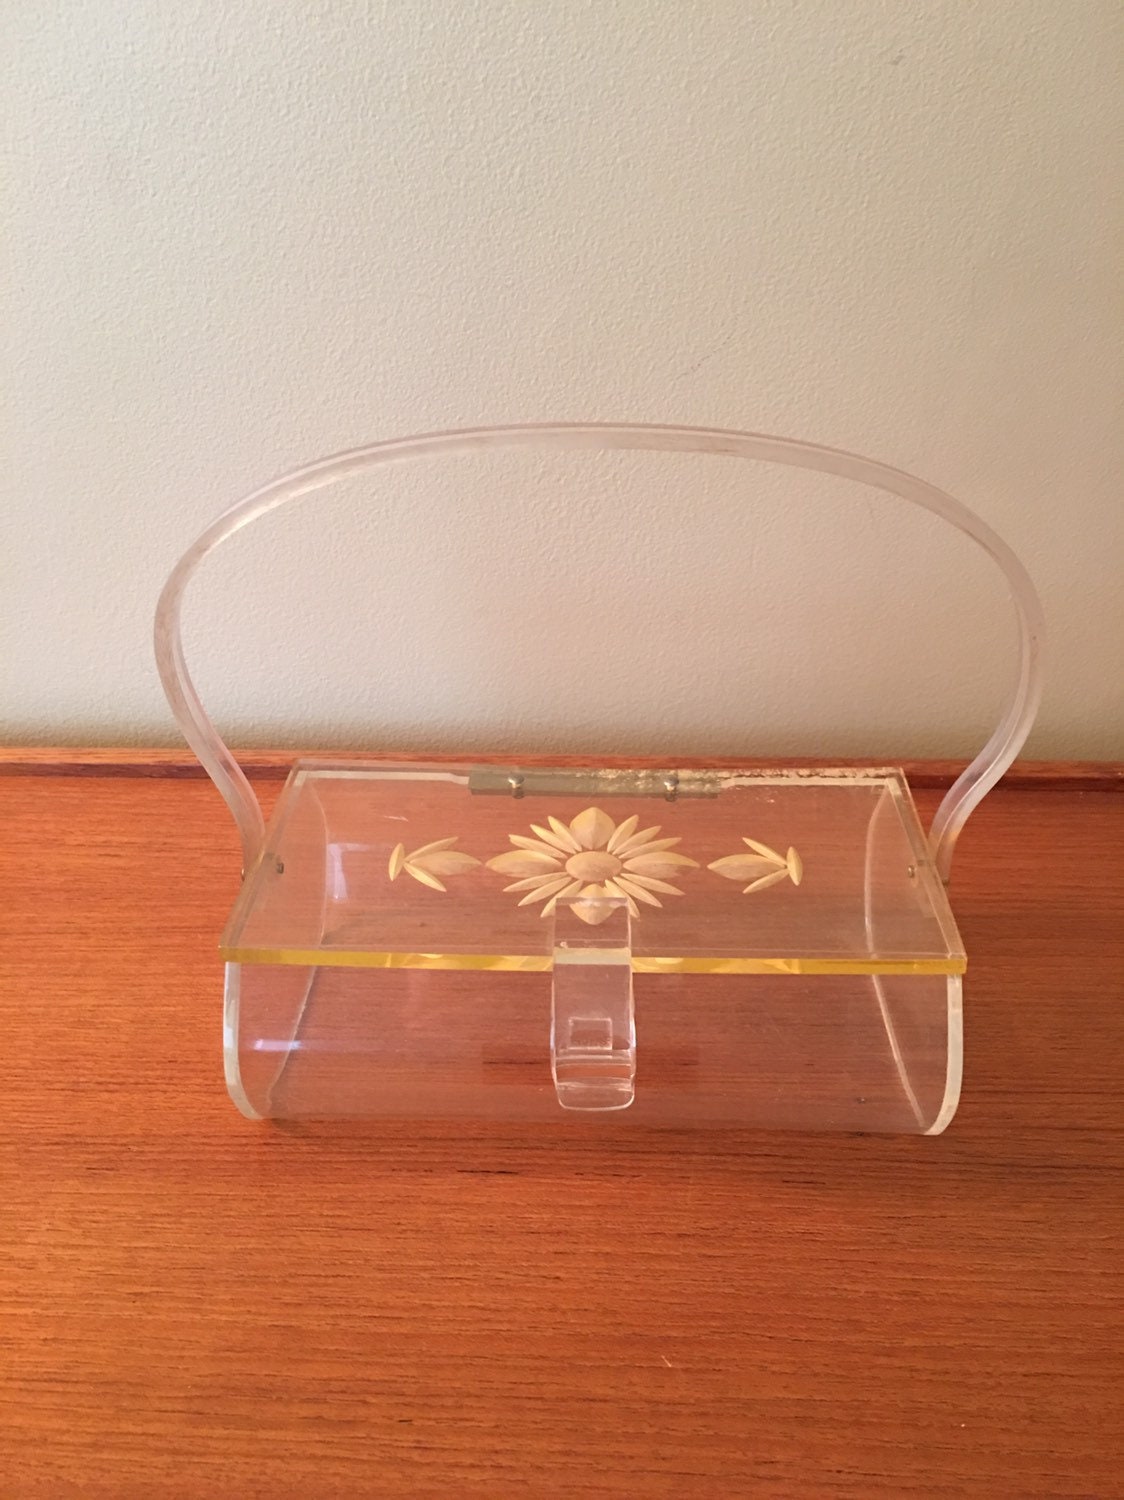 Stunning Vintage 1950's Clear Acrylic Box Purse with Glitter and